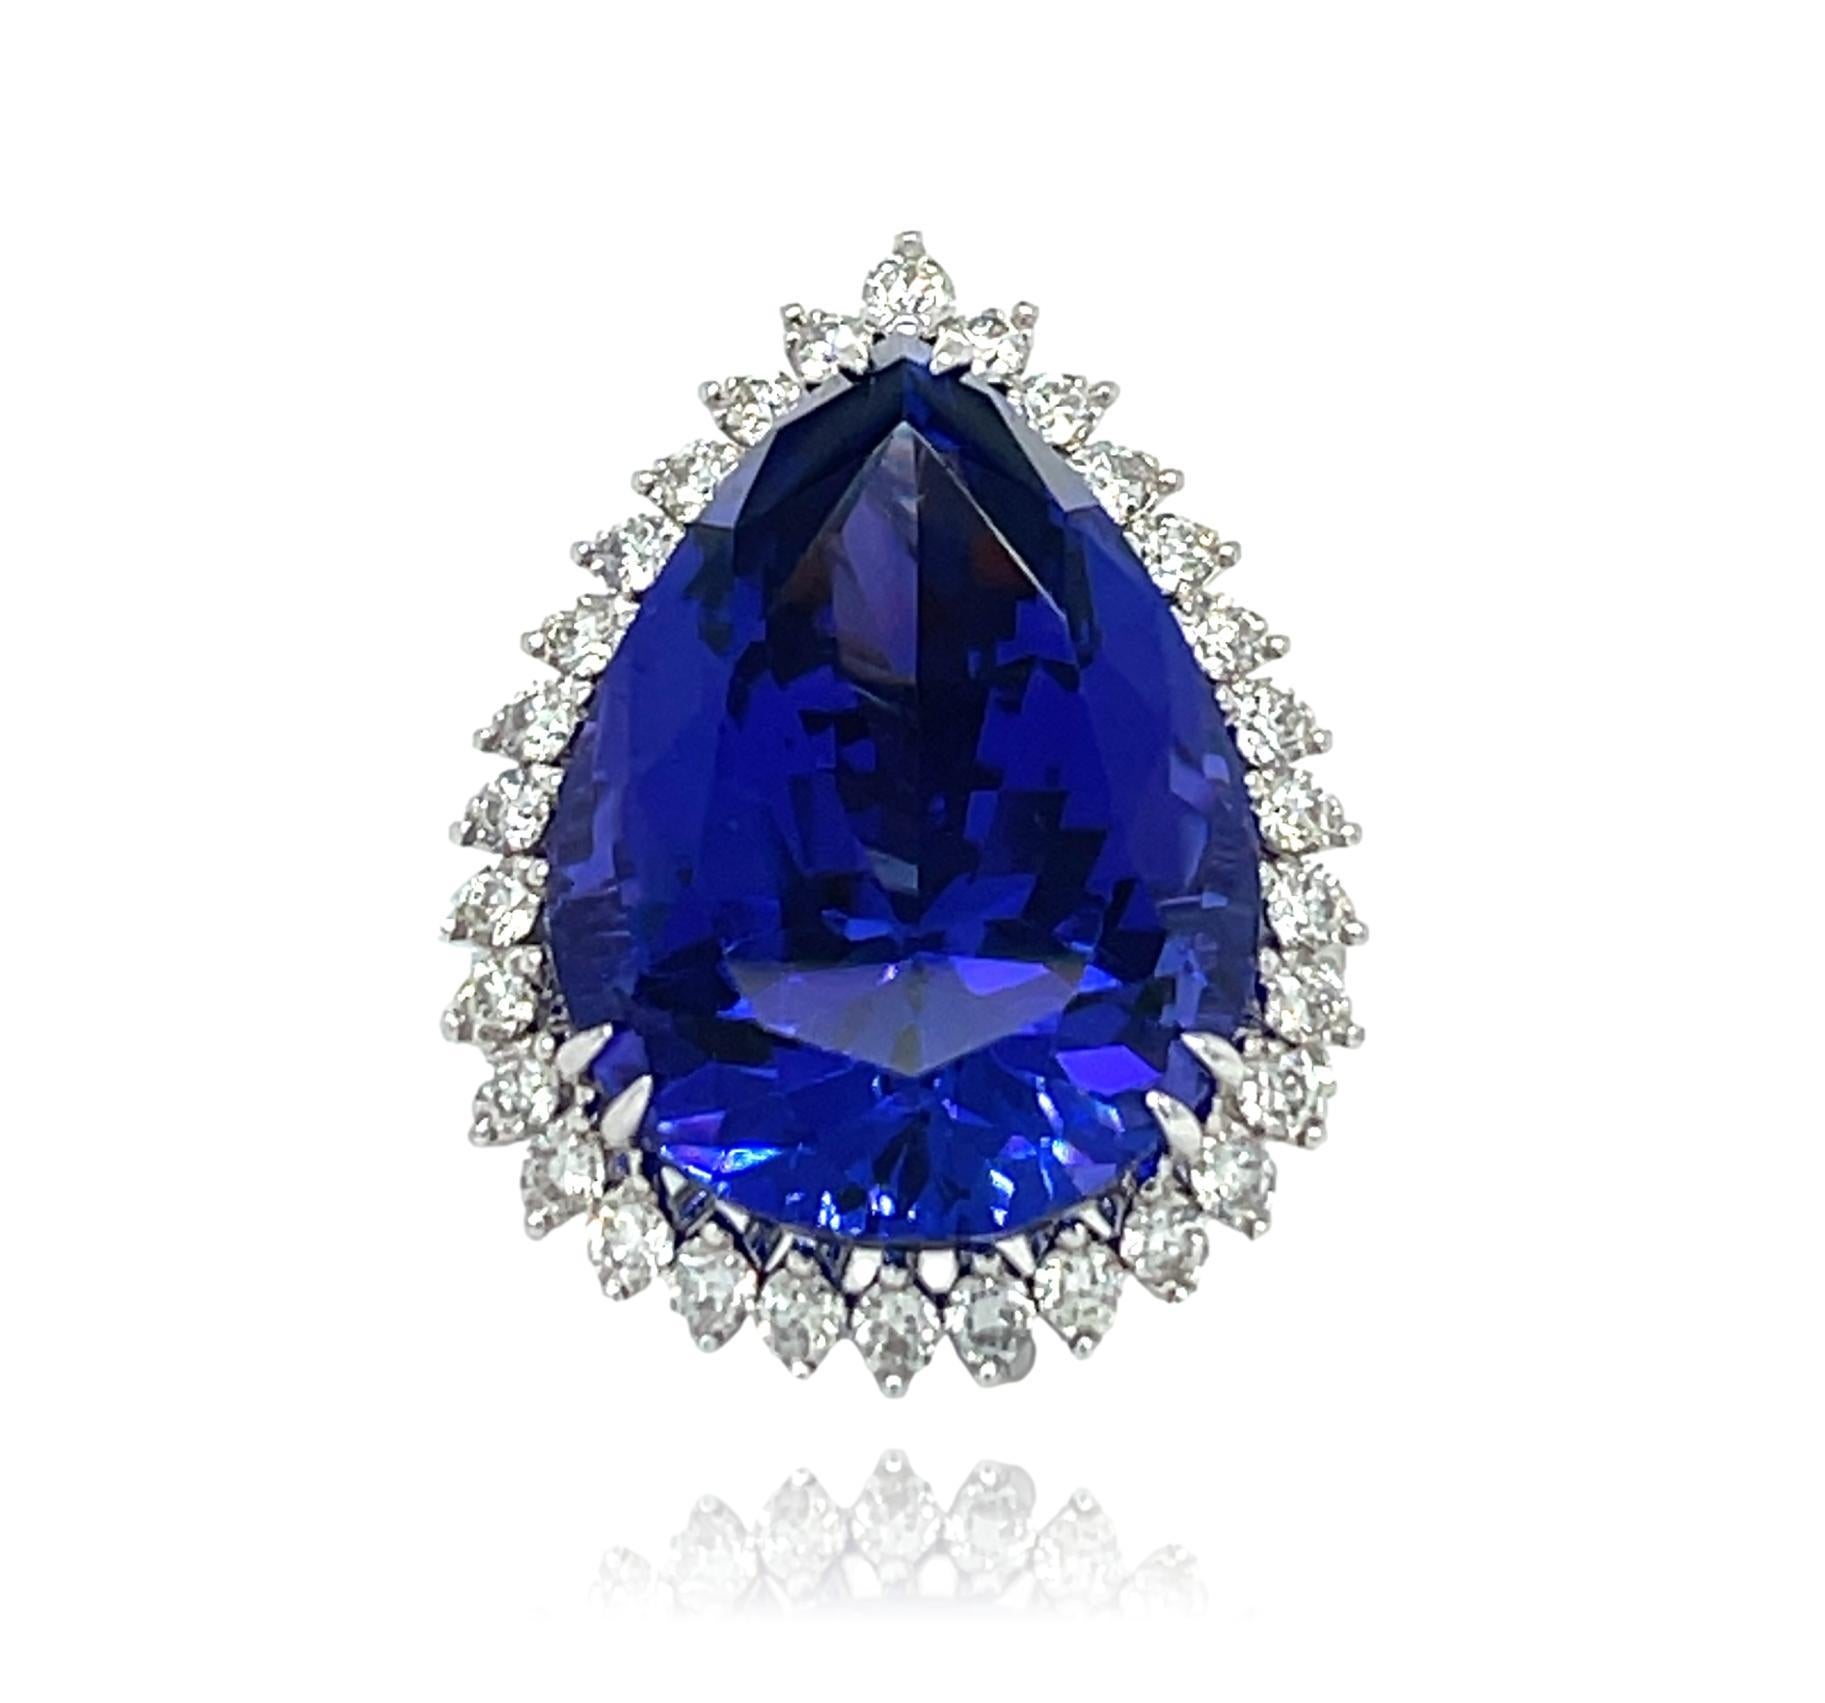 22 ct AAA Tanzanite and Diamond Ring in 18K White Gold For Sale 2